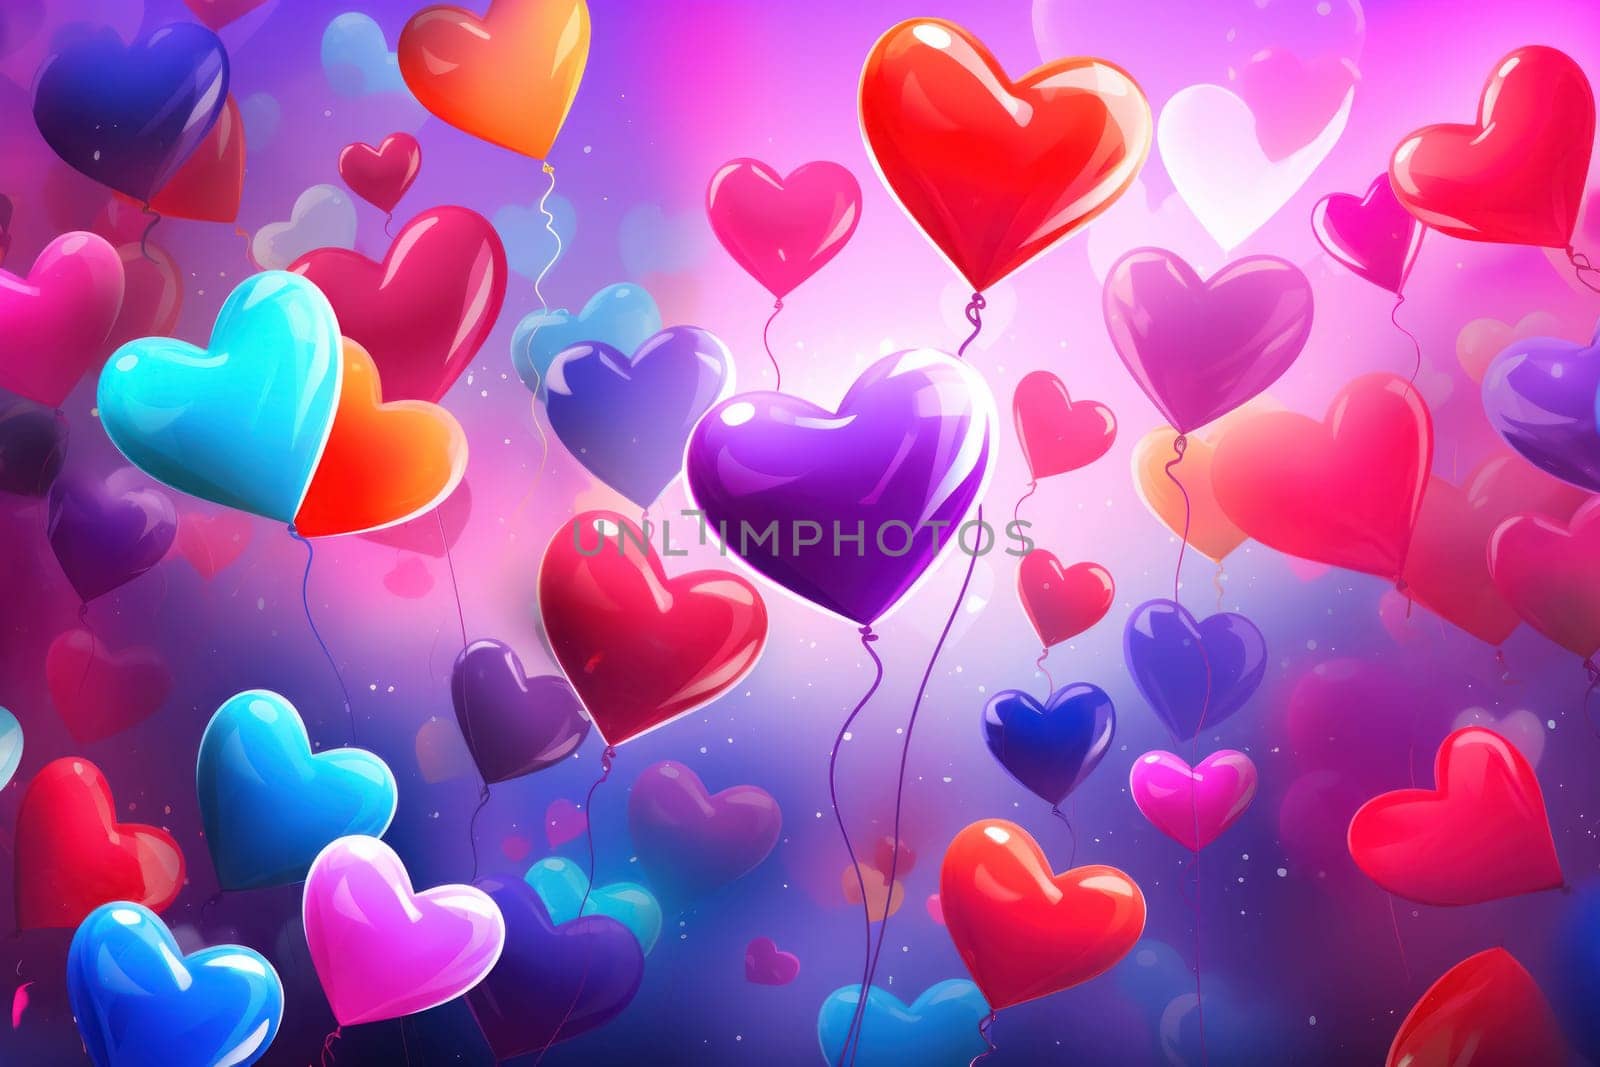 Colorful Heart Balloons on Dreamy Background by andreyz